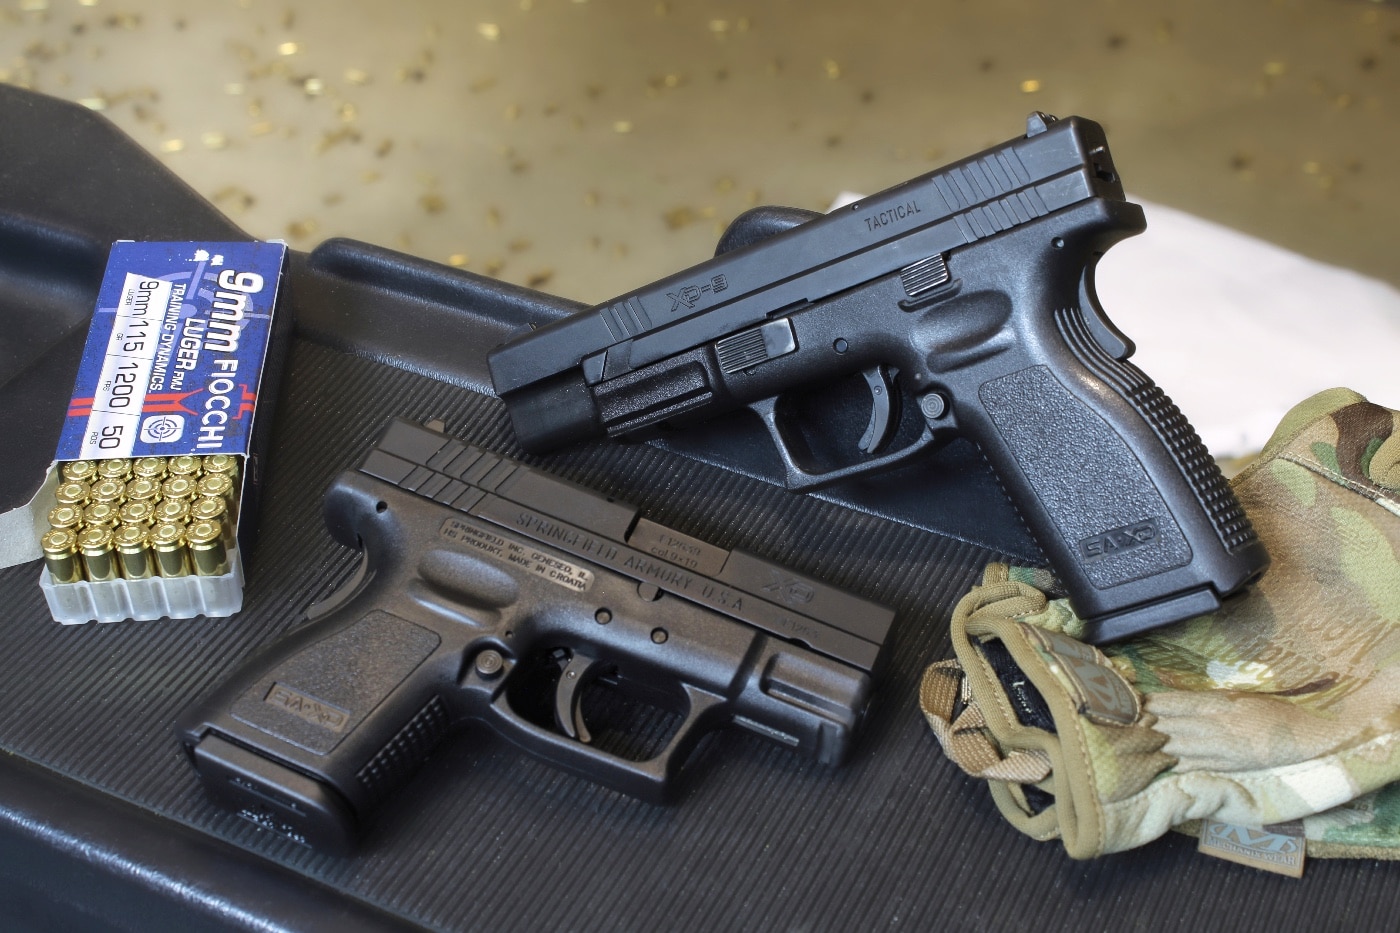 In this image, we see the Springfield Armory XD Tactical and the XD Subcompact pistols on a bench at a shooting range. These 9mm pistols offer excellent personal protection options.